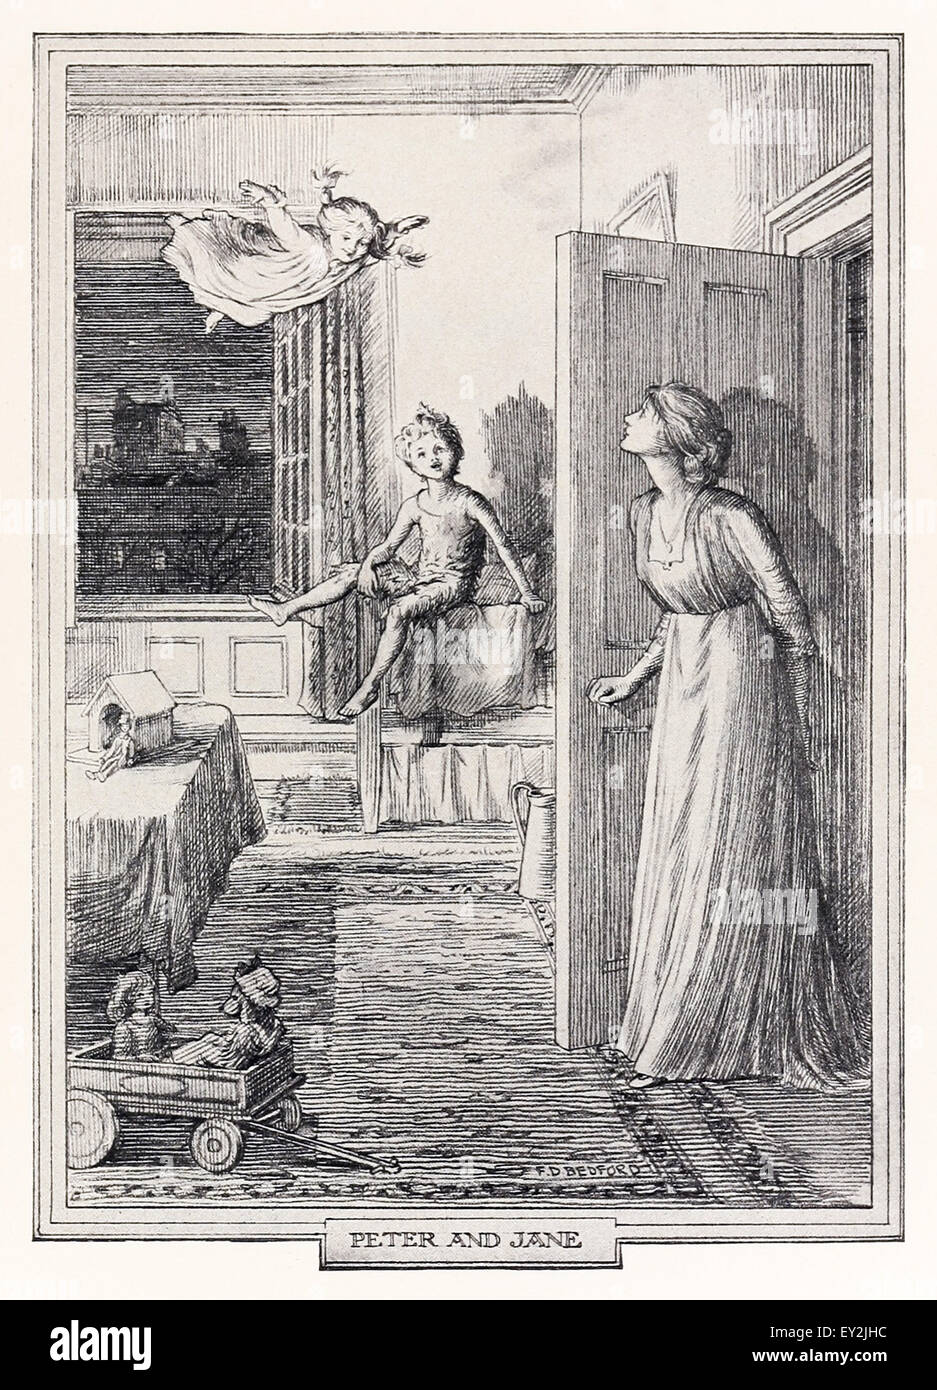 'Peter and Jane' from Chapter 16 Peter visits a grown up Wendy and flies off with her daughter Jane. From 'Peter & Wendy' by J.M. Barrie (1860-1937), illustration by F.D. Bedford (1864-1954). See description for more information. Stock Photo